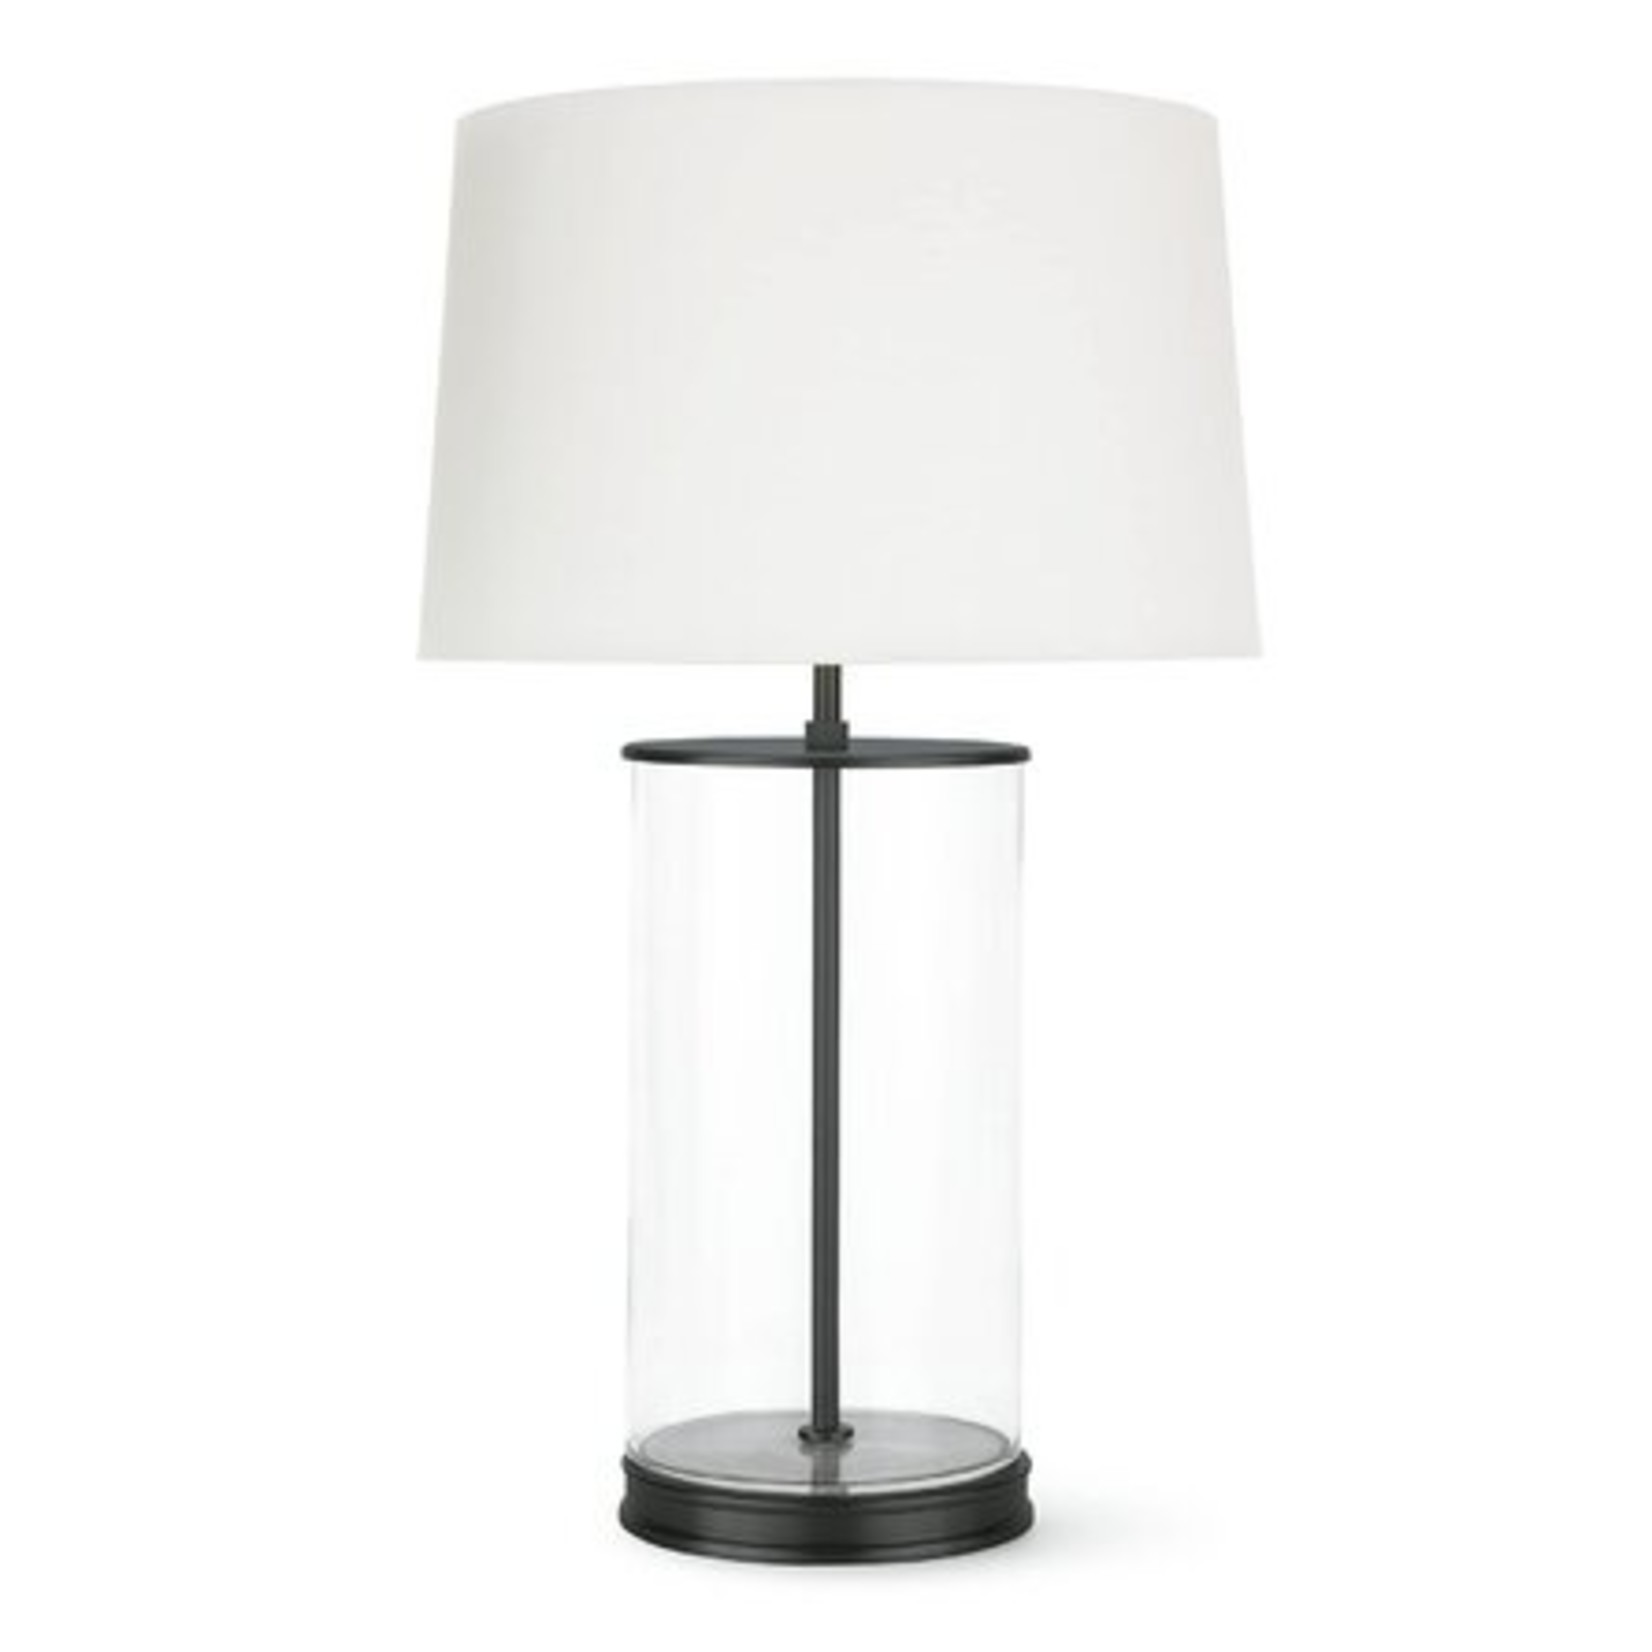 Magelian Glass Table Lamp - Oil Rubbed Bronze